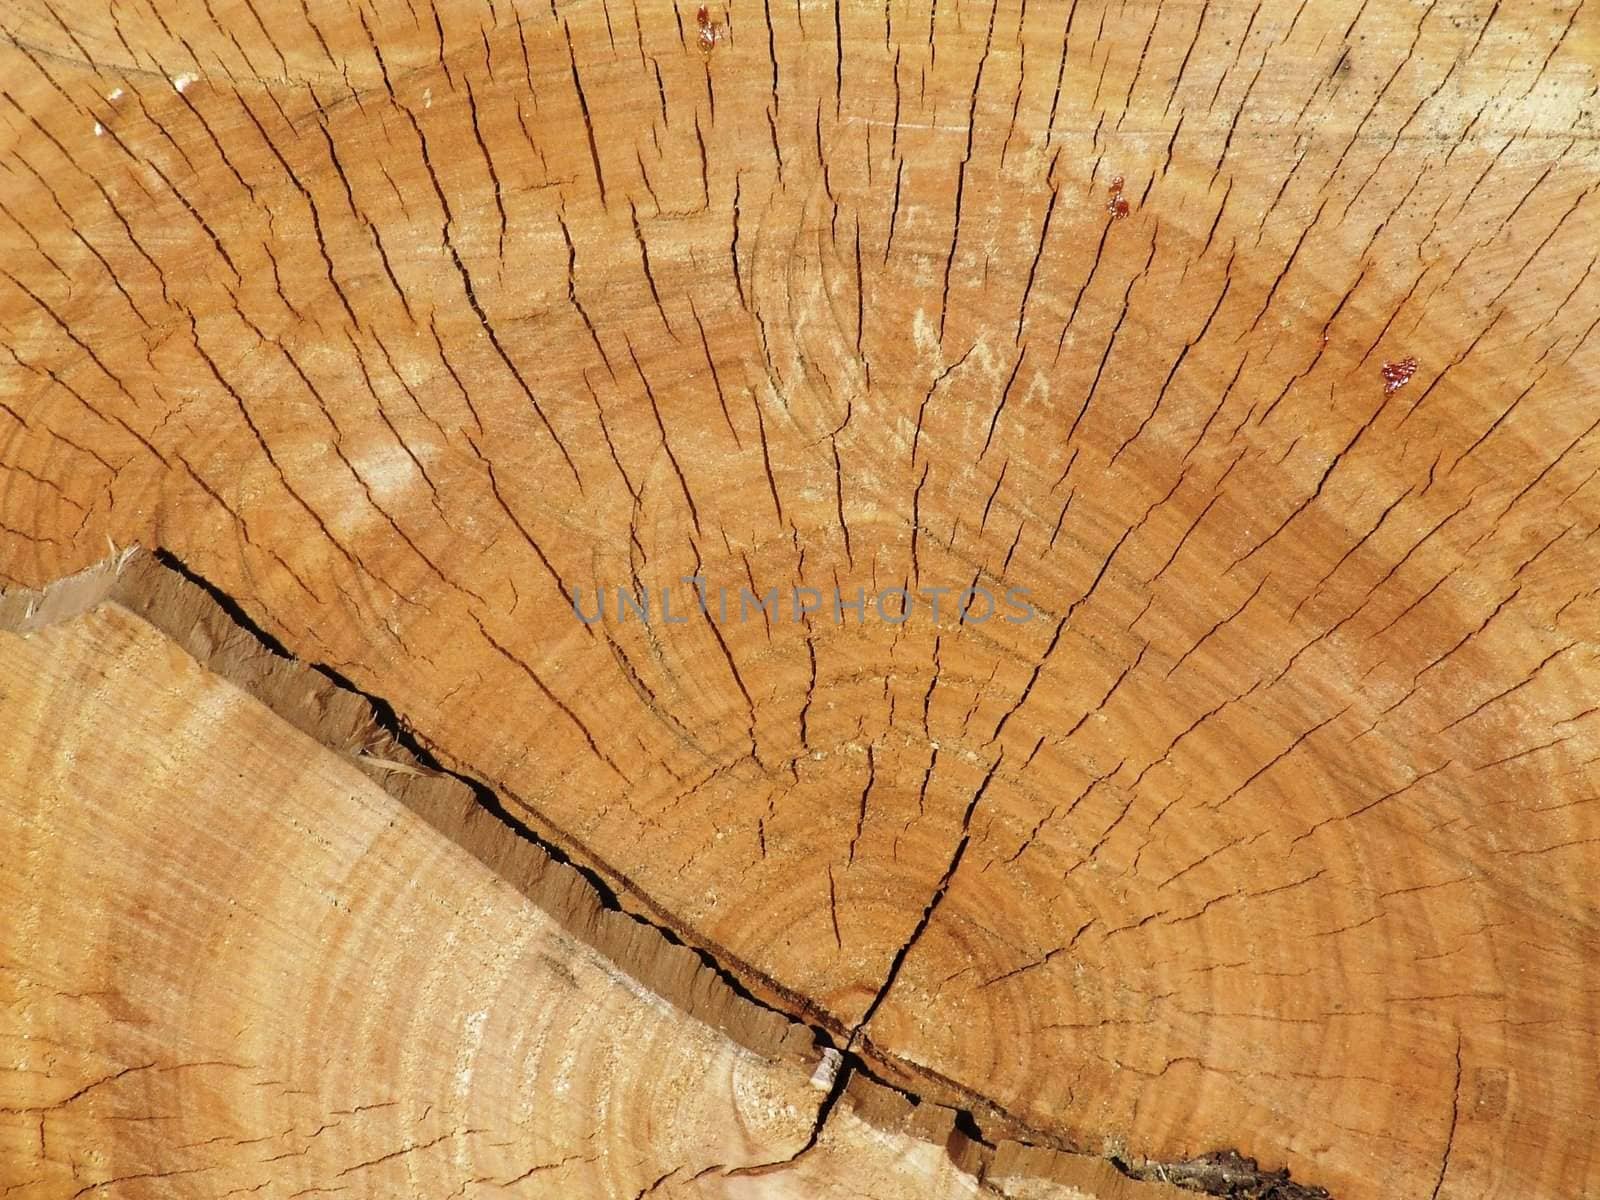 The photo shows a cut tree growth rings